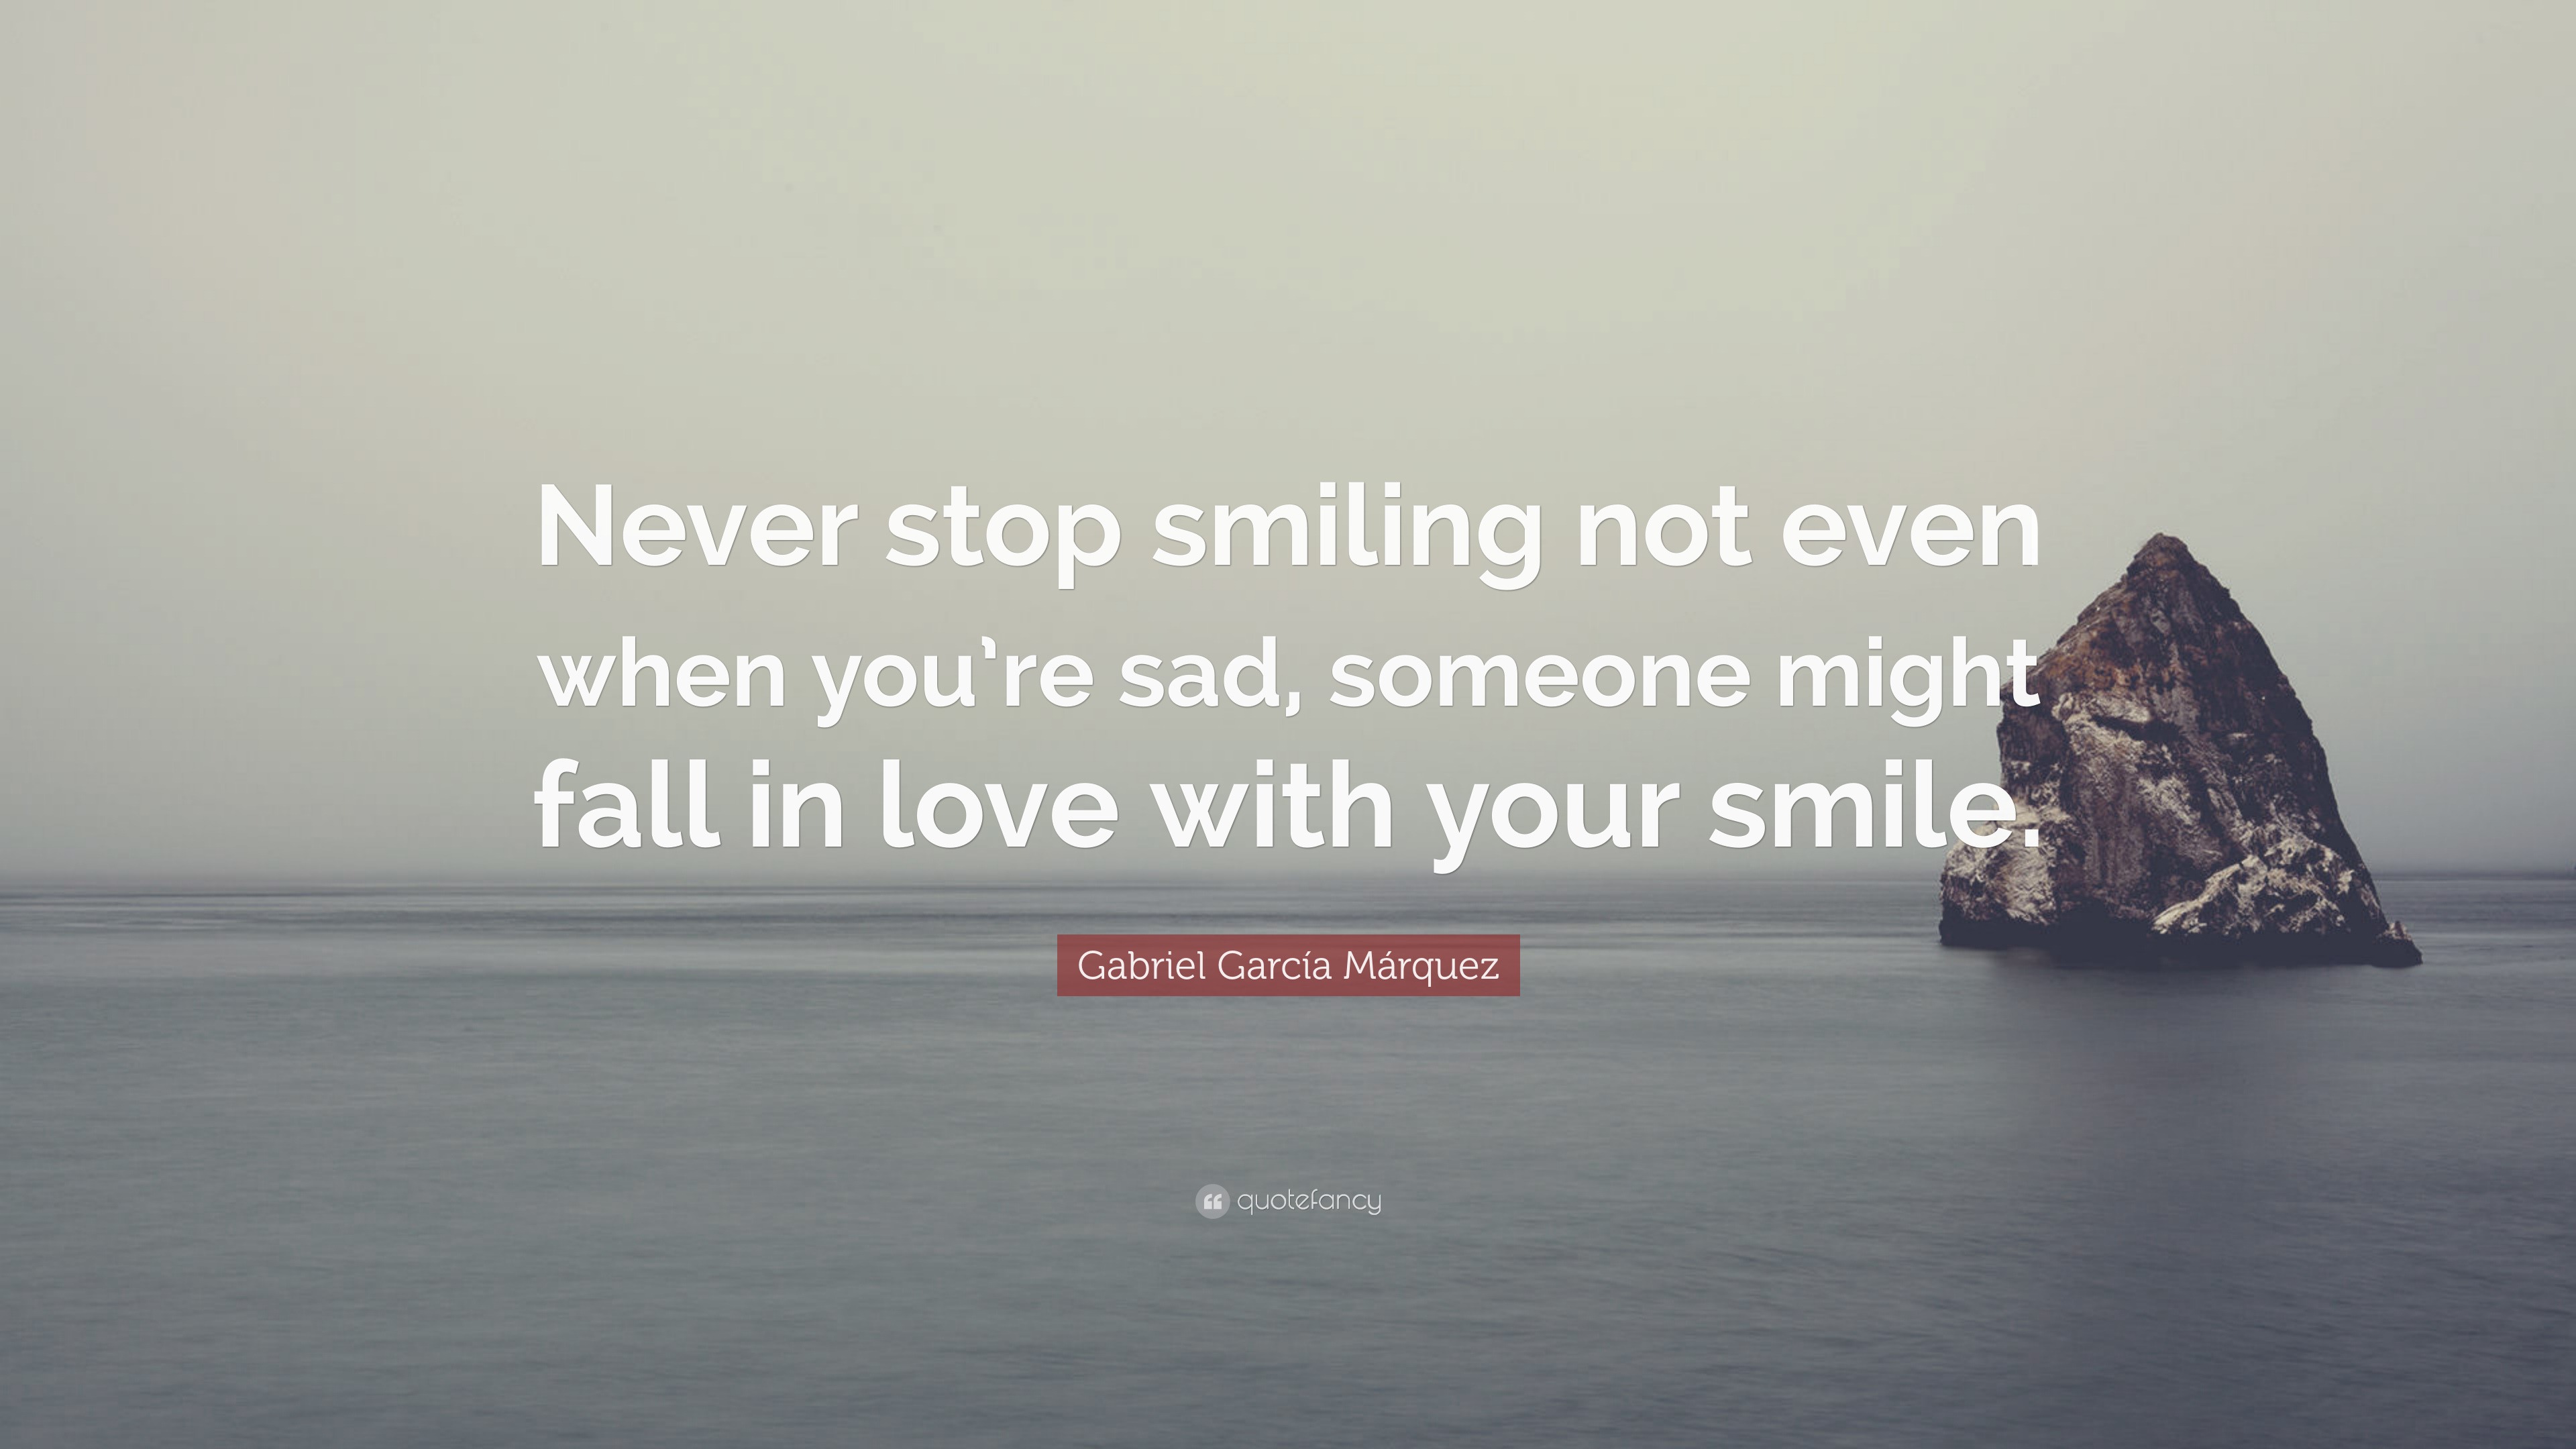 Gabriel Garcia Marquez Quote Never Stop Smiling Not Even When You Re Sad Someone Might Fall In Love With Your Smile 12 Wallpapers Quotefancy